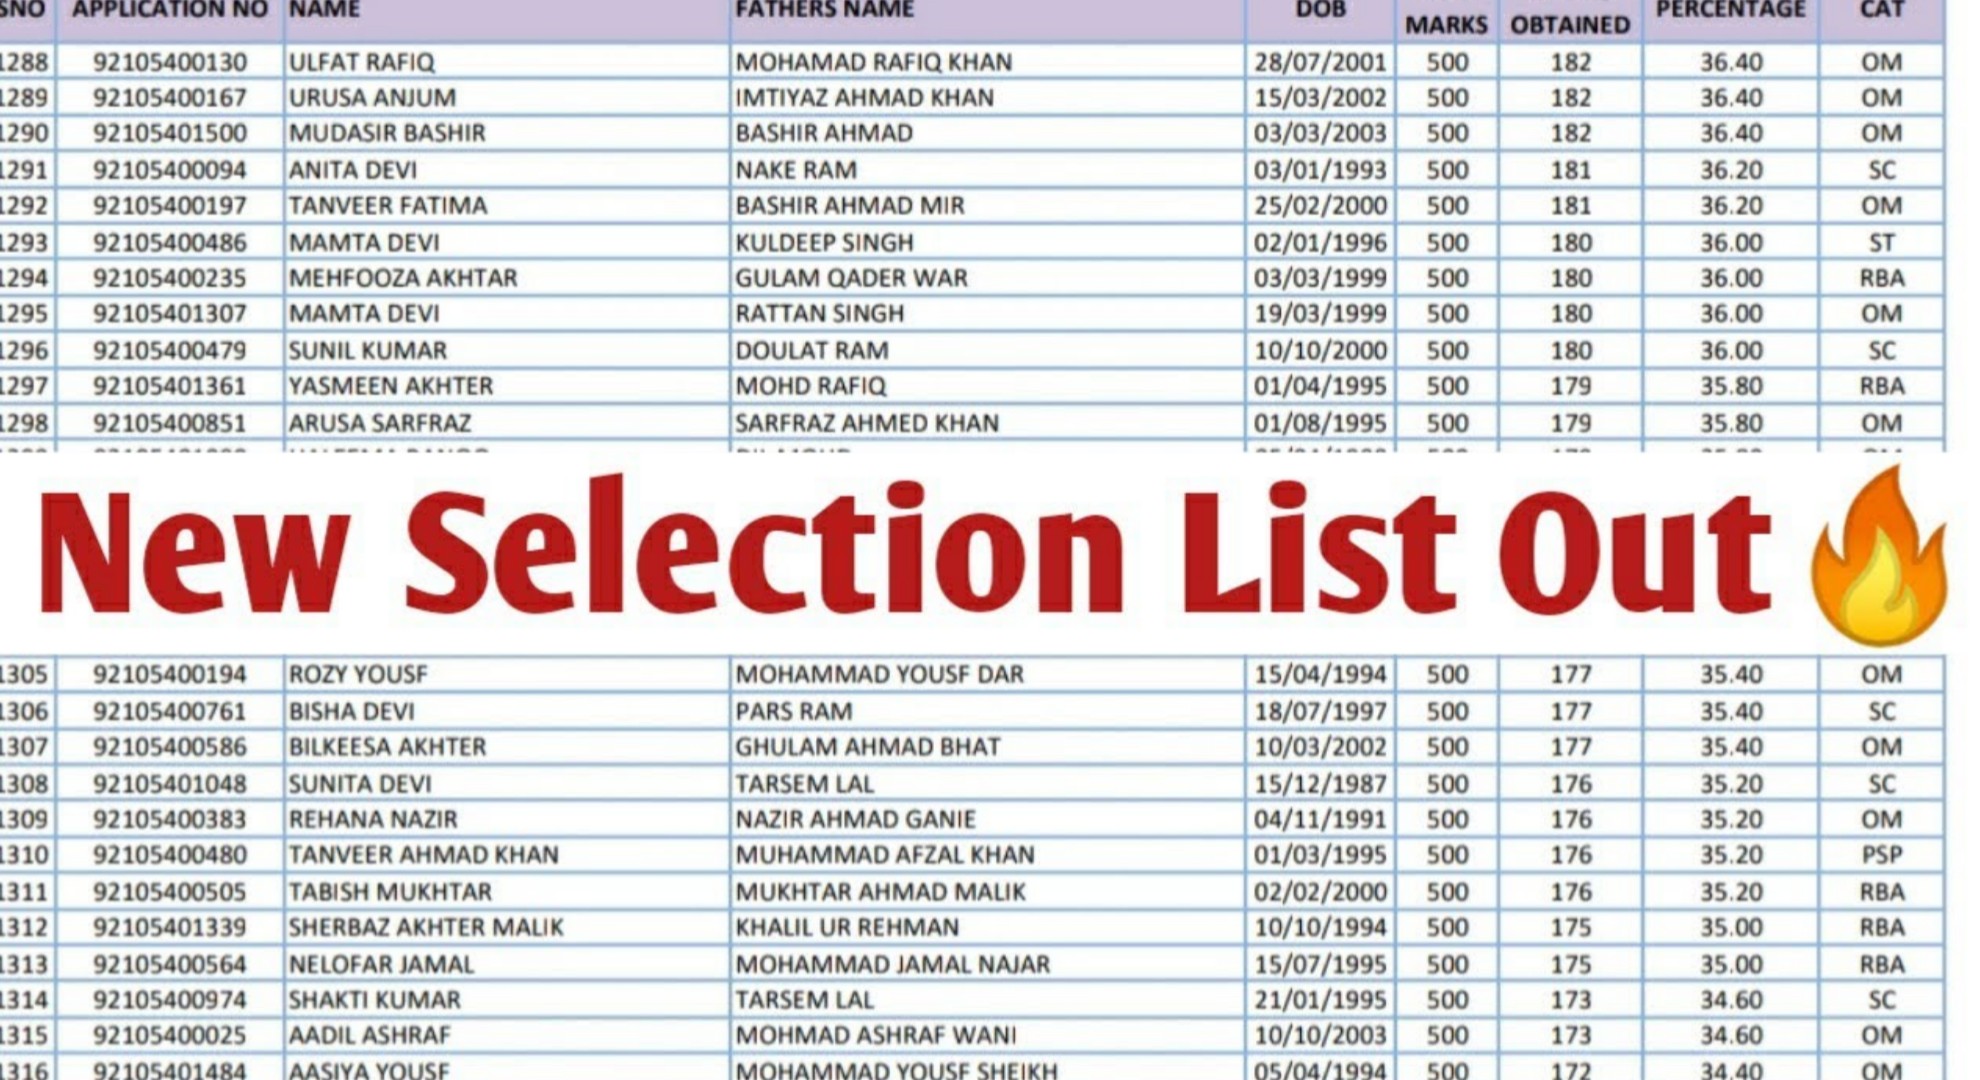 JKSSB Final Selection List Of 1524 Posts For Various Departments - Download PDF